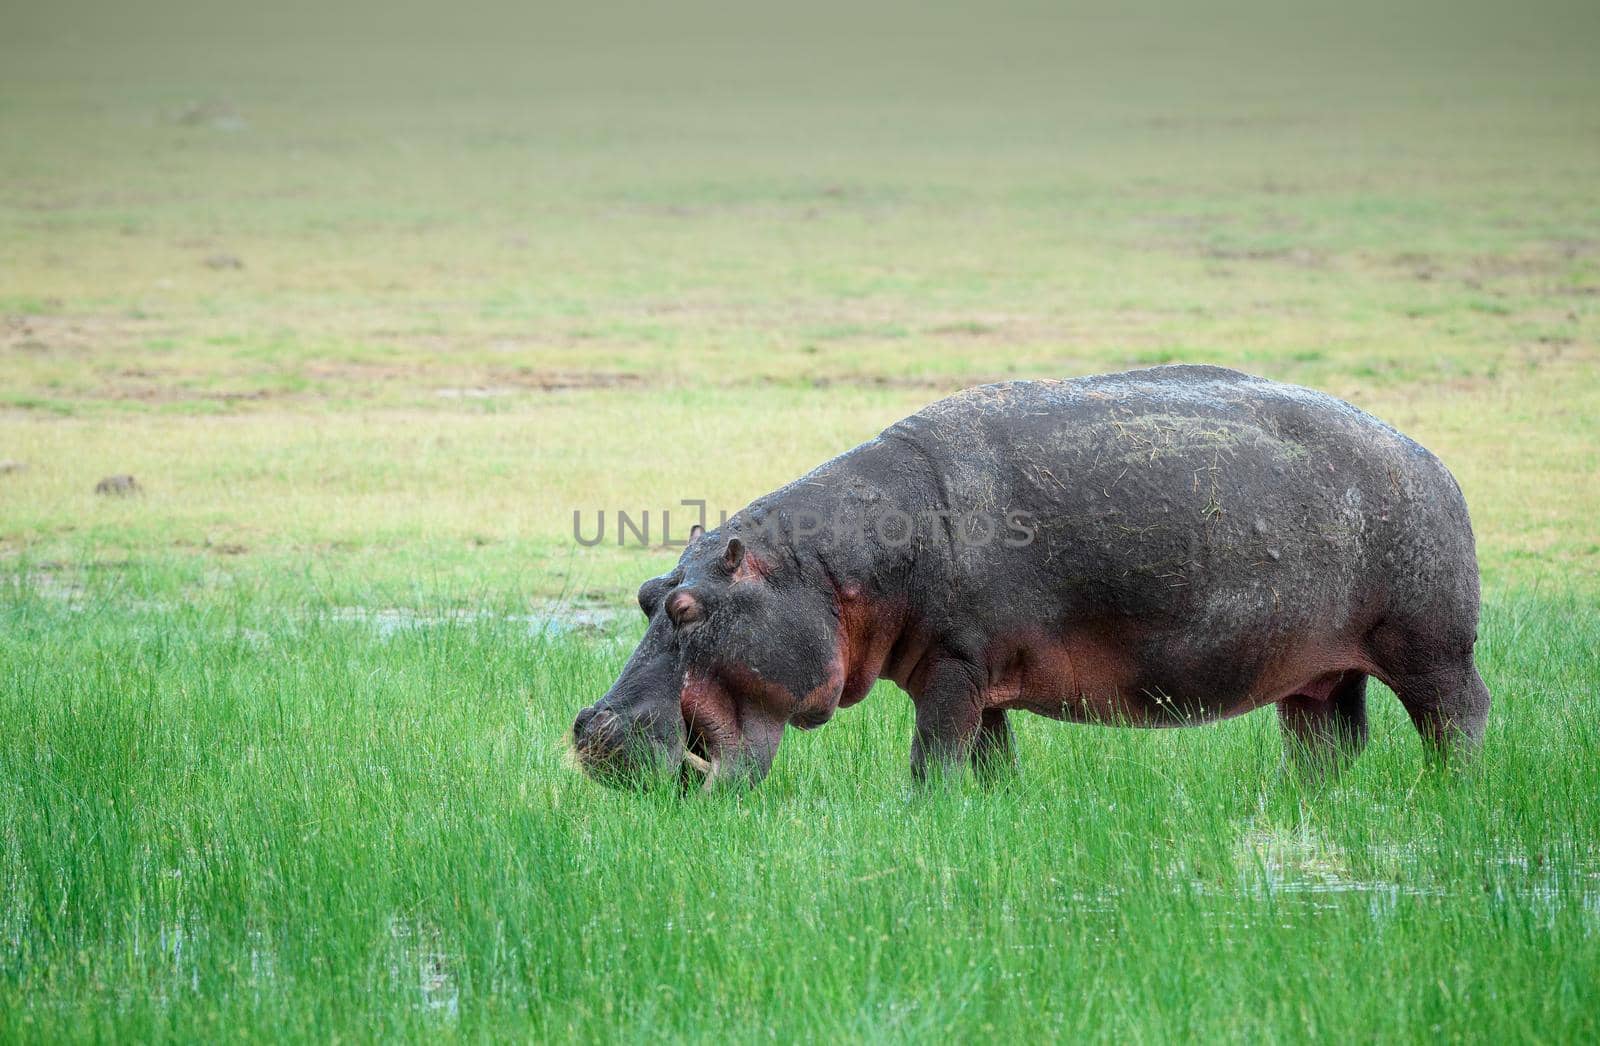 Hippo grazing on grass in the Serengeti in Africa